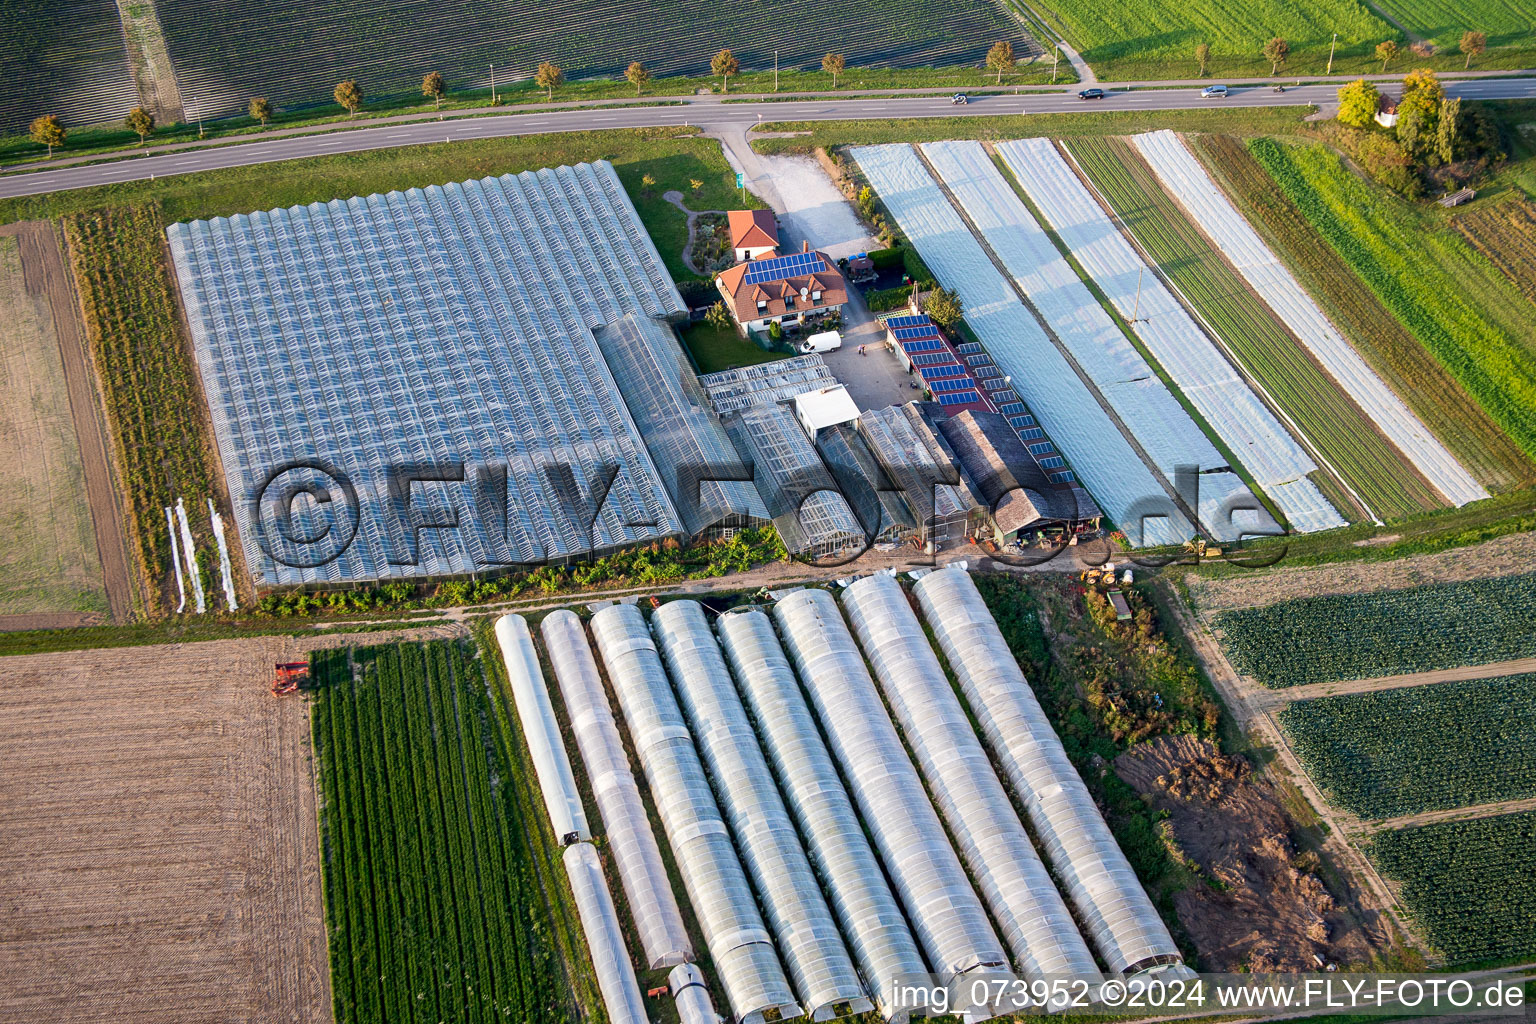 Farm shoop with Glass roof surfaces in the greenhouse for vegetable growing ranks in Herxheim bei Landau (Pfalz) in the state Rhineland-Palatinate, Germany